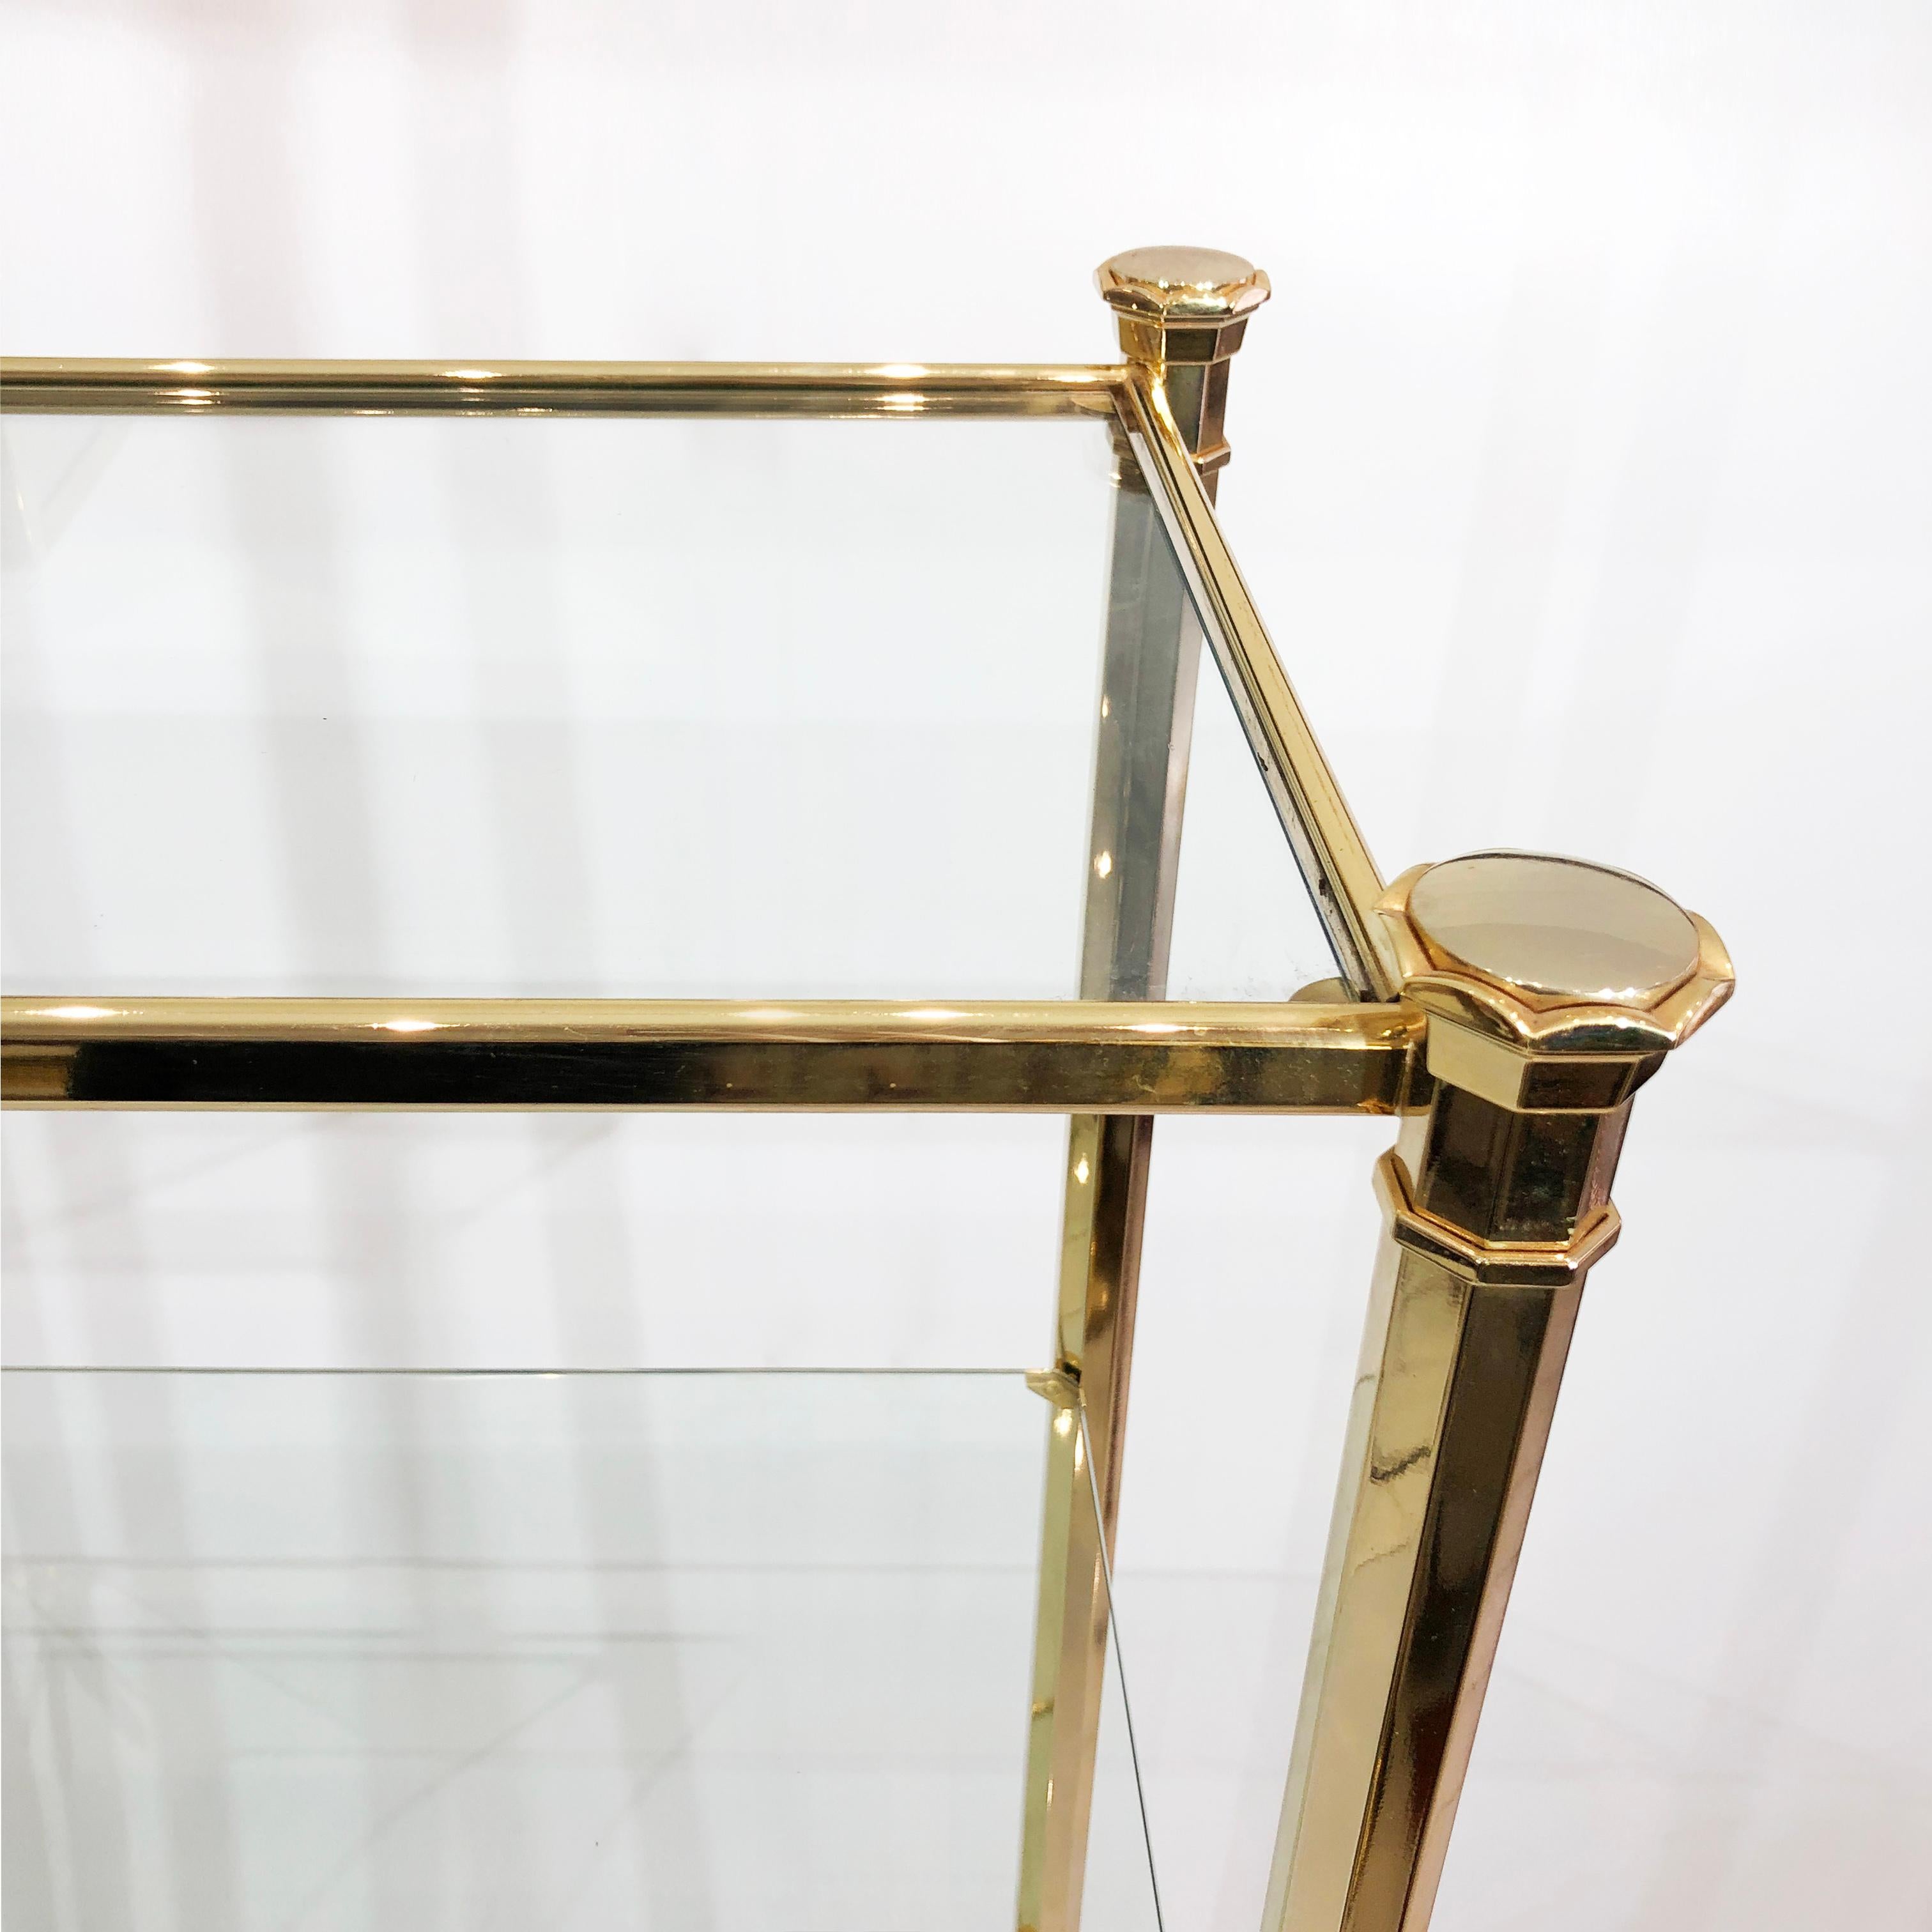 Metal Kesterport Gold Glass Polygonal Etagere Brass Shelving 1980s Display Unit For Sale